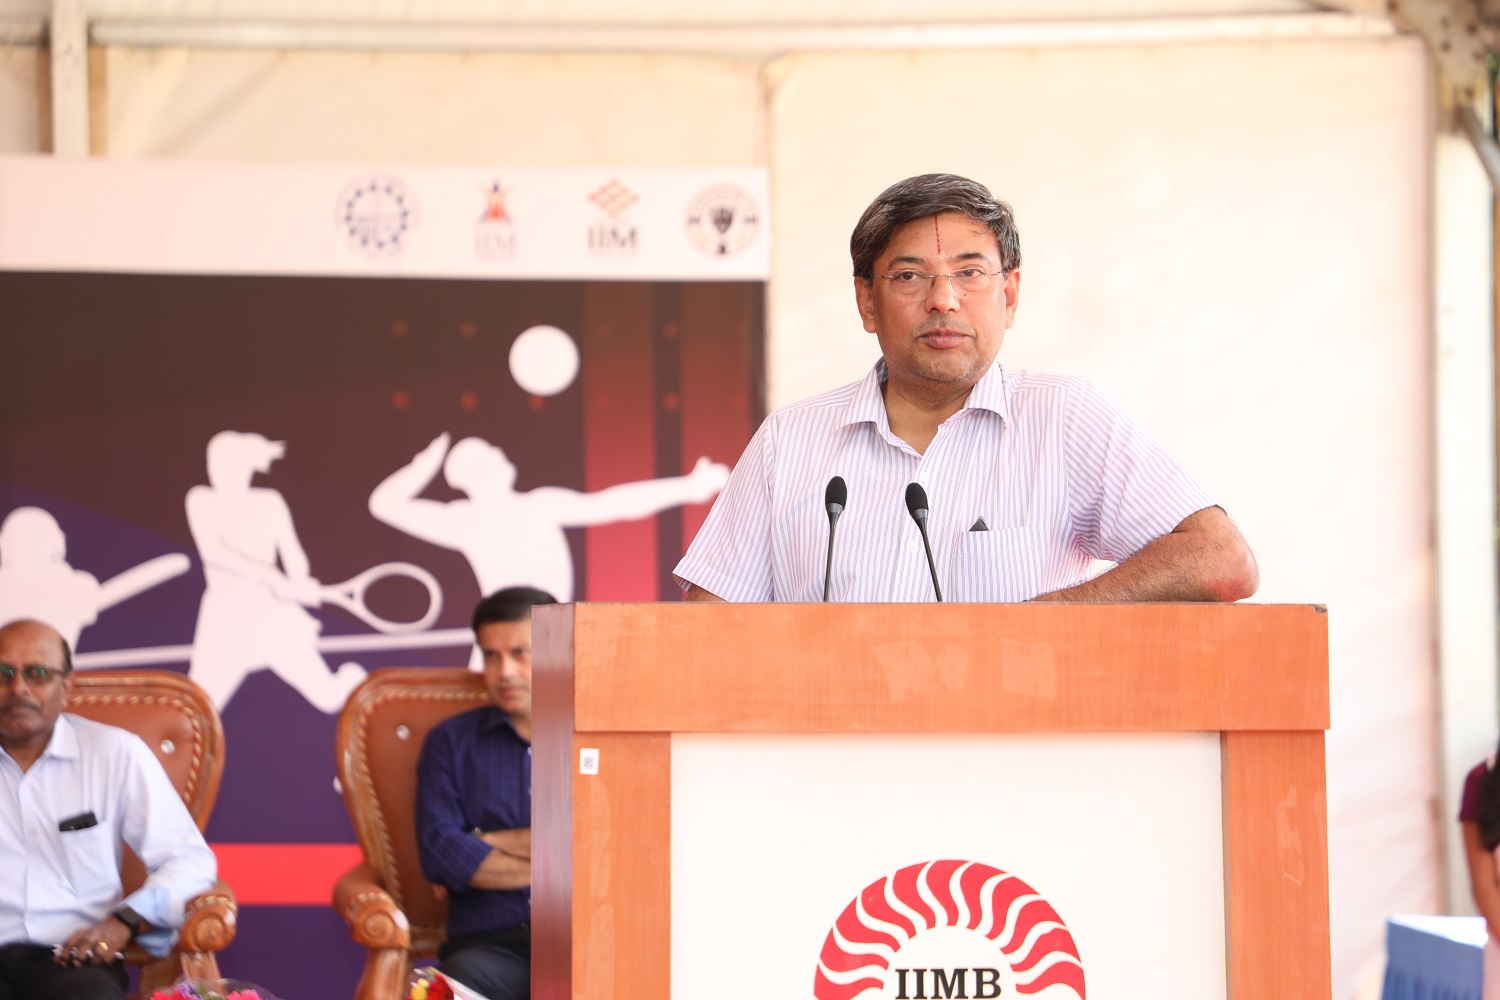 Professor R Srinivasan, Chairperson, PGP and PGP-BA, welcomes participants to the inter-IIM sports meet.